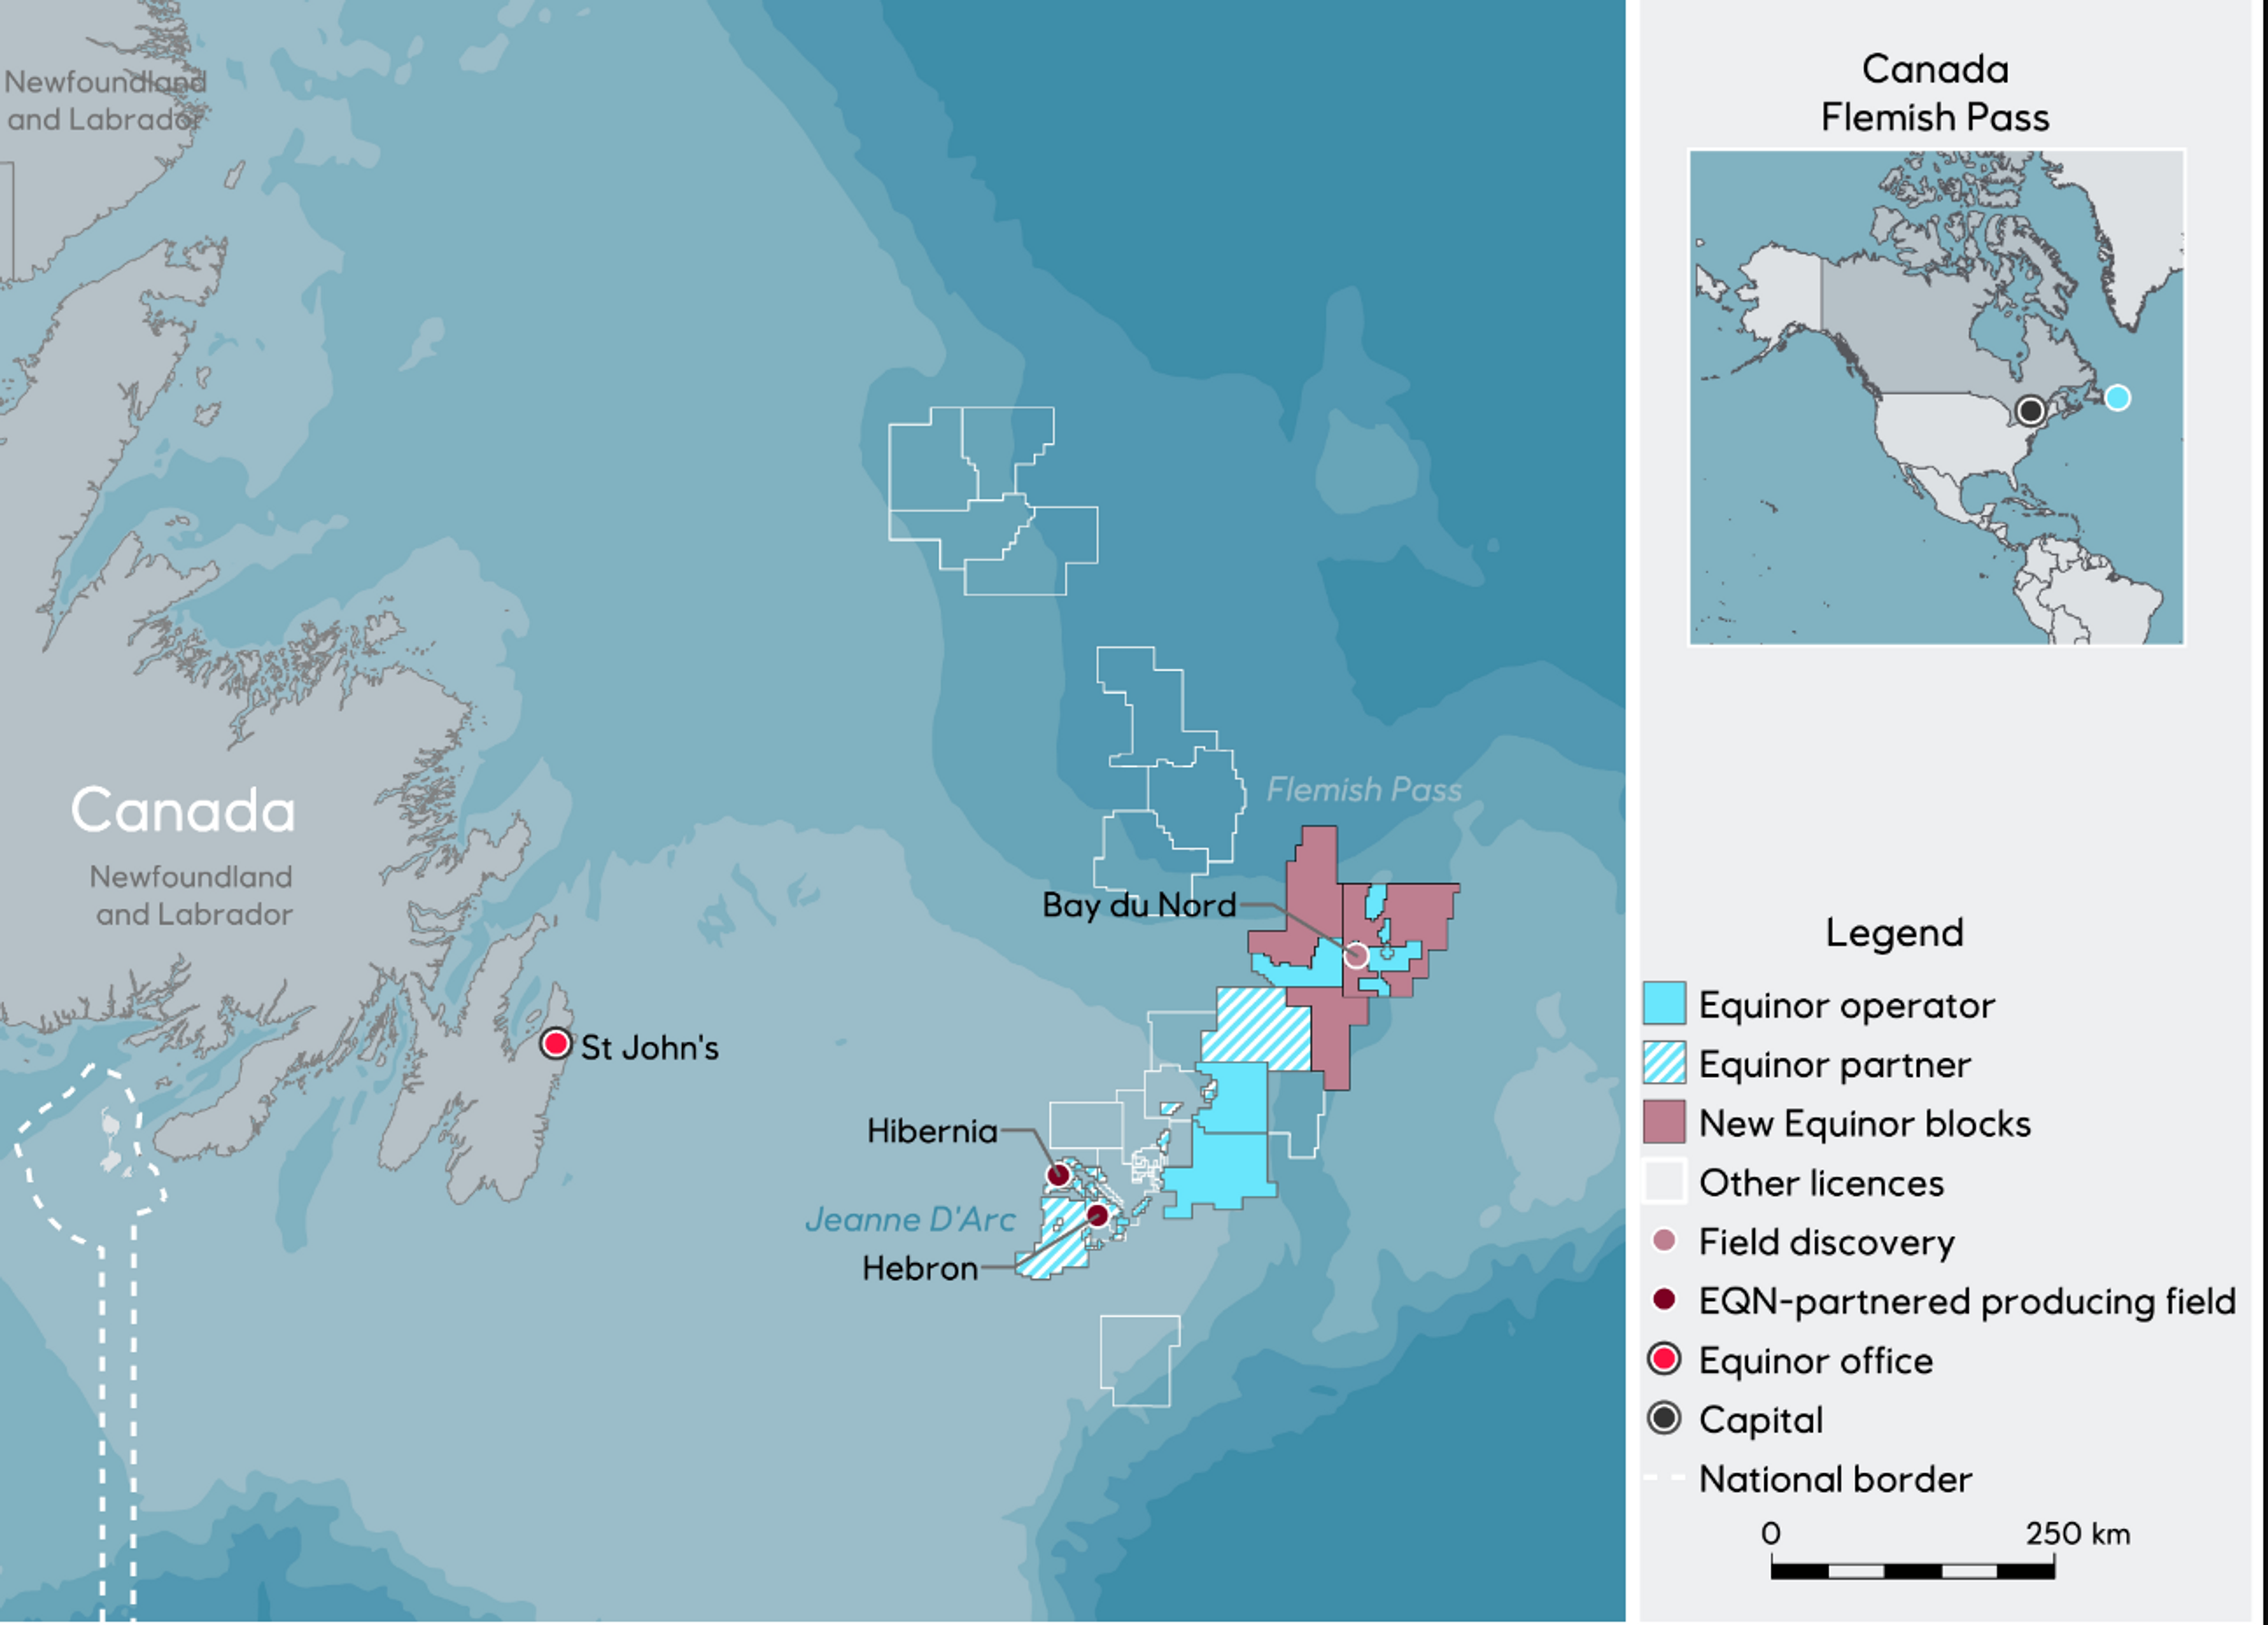 Map with overview of licences and discoveries offshore Newfoundland